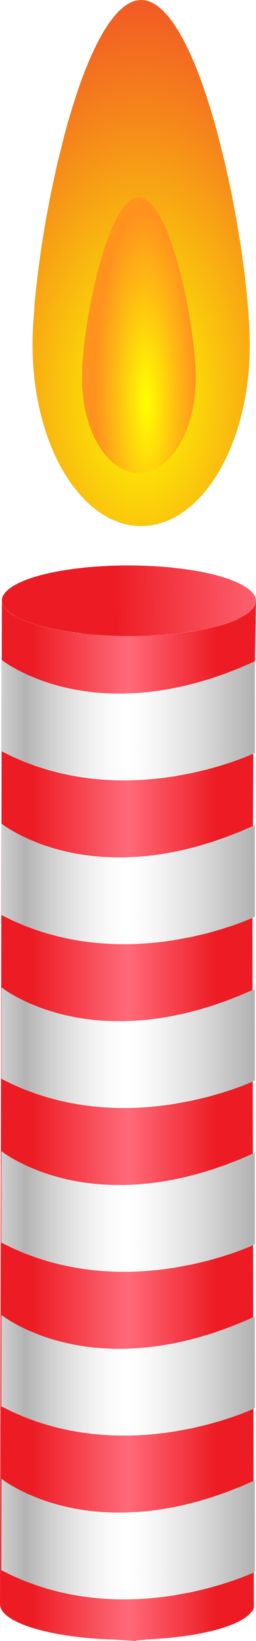 clipart candle red candle